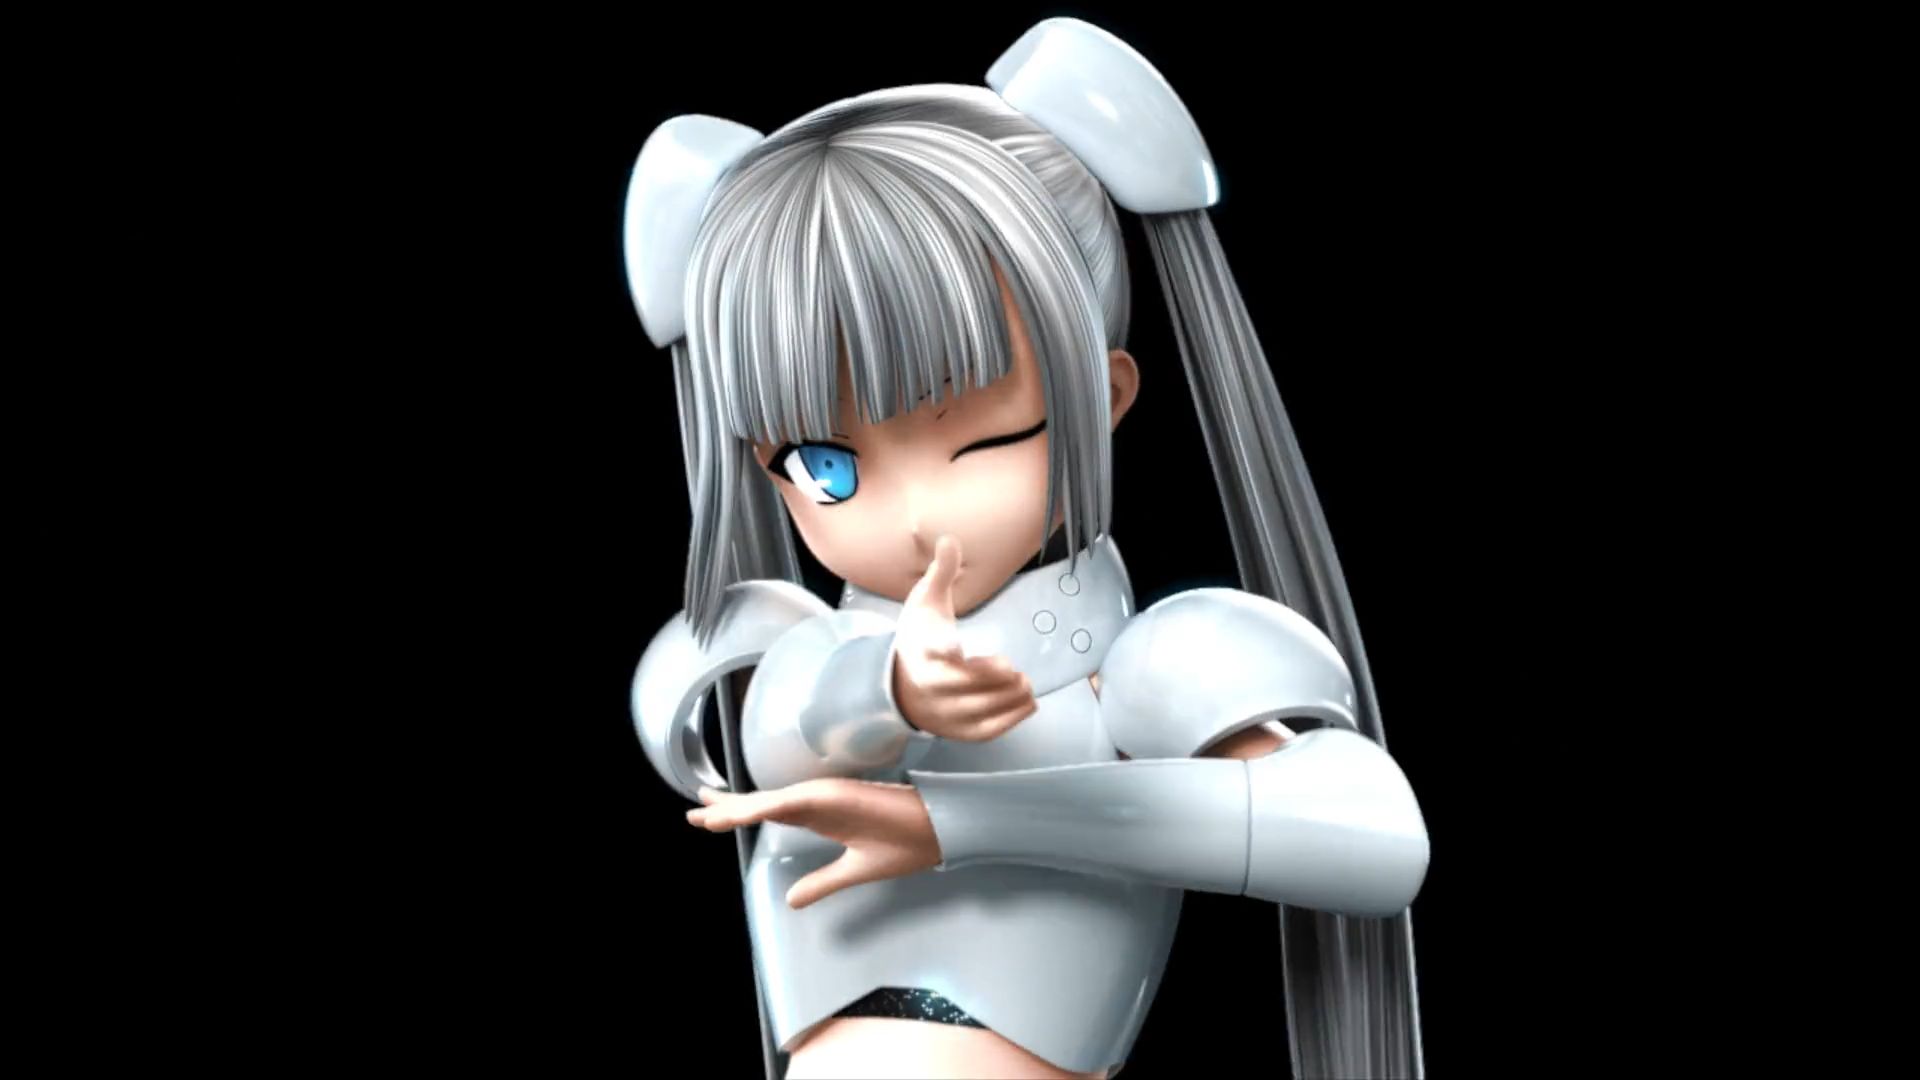 Miss Monochrome: The Animation is one of the best anime series with girl idols. 